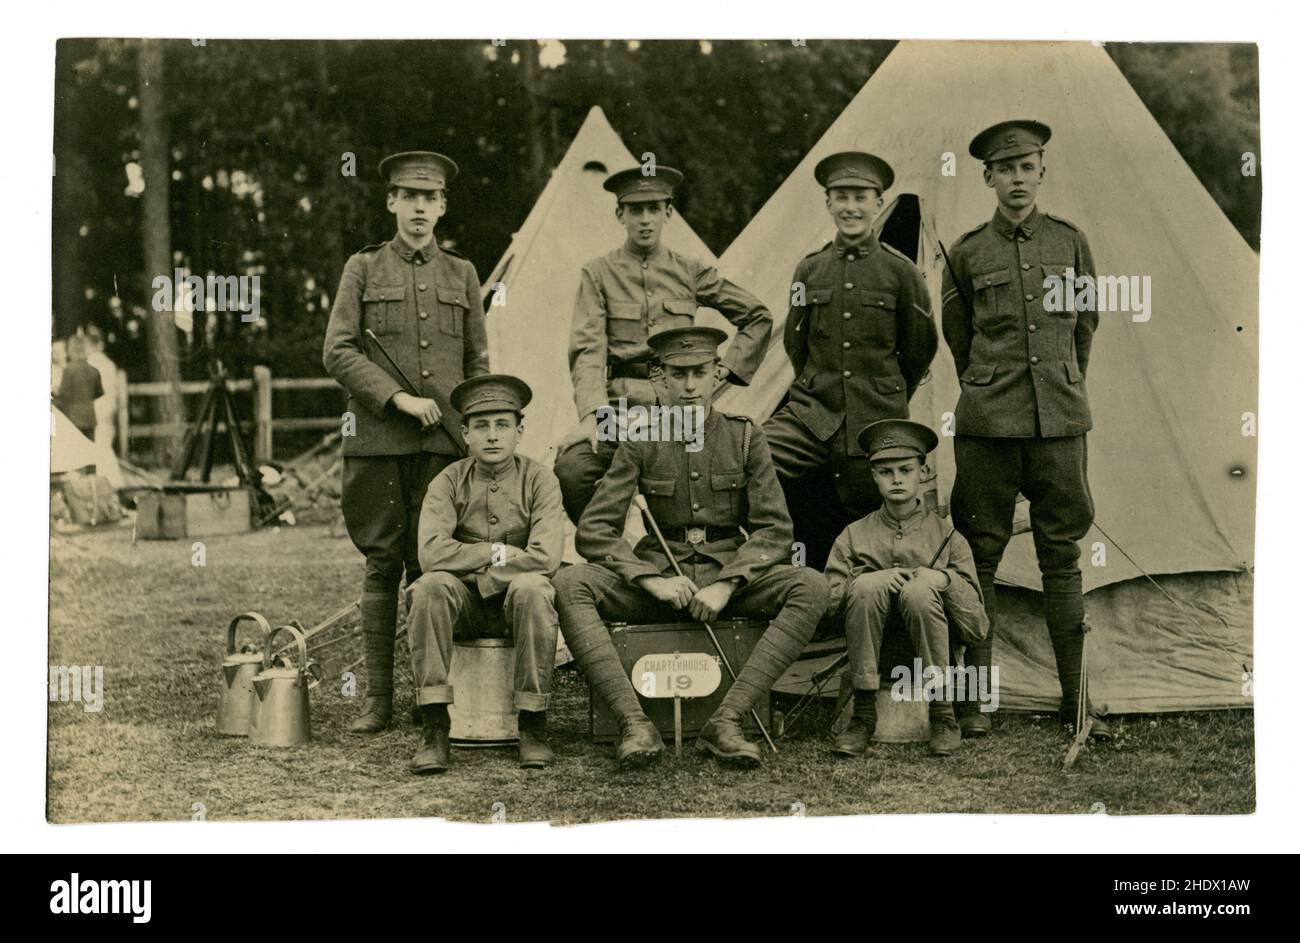 Original WW1 era postcard of young recruits at an Officer training camp - they were Officer Training Corps (junior division) from Charterhouse School of the Queens Royal West Surrey Regiment (The Queens) - which was based at Stoughton Barracks, in Guildford. On their cap badges the recruits have a version of the Queens badge with a Charterhouse banner instead of a Queens banner underneath the Paschal lamb symbol. On the RH tent is written corps 8 hut, the boys have a Charterhouse 19 sign at their feet. The older recruit holding the baton is perhaps a leader or mentor to the younger boys. U.K. Stock Photo